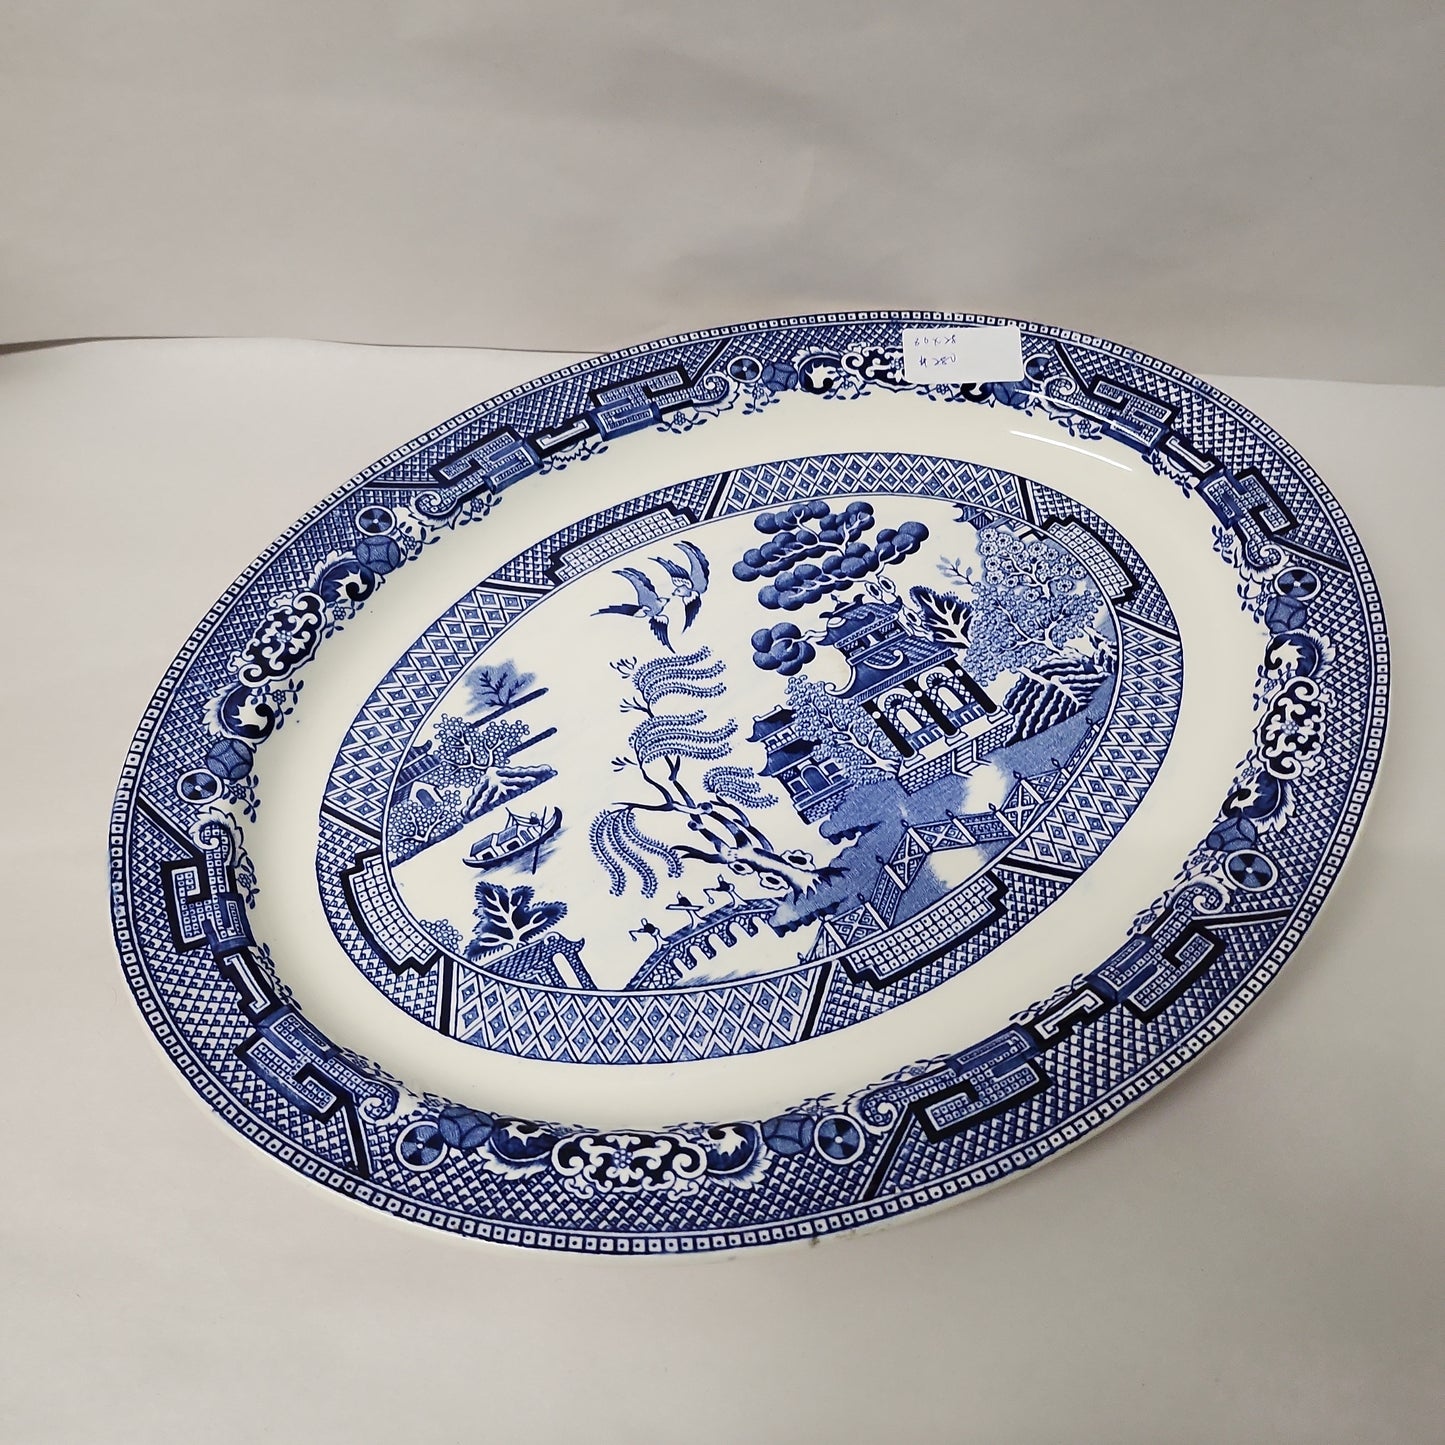 Antique wood and son blue and white willow big platter 36 x 26